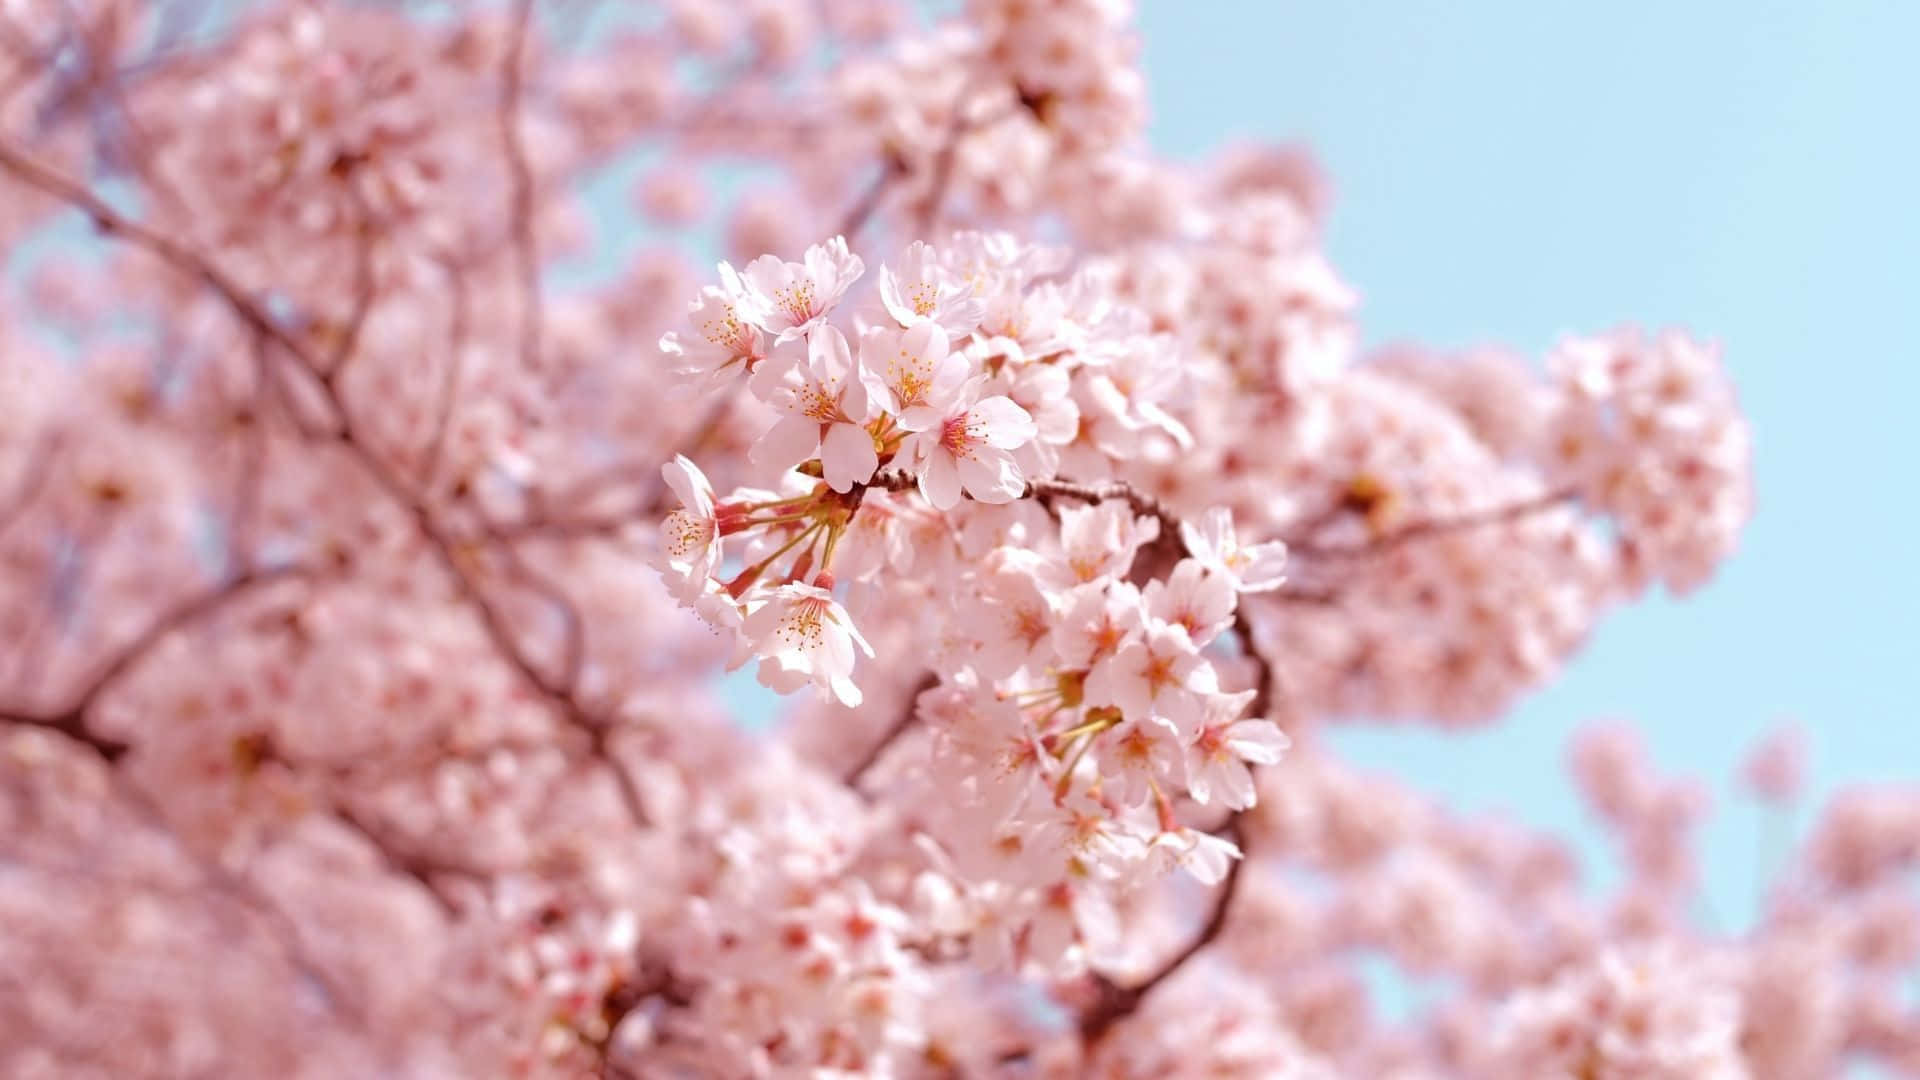 Cherry Blossom Beautiful Flowers Pictures 1920 x 1080 Picture